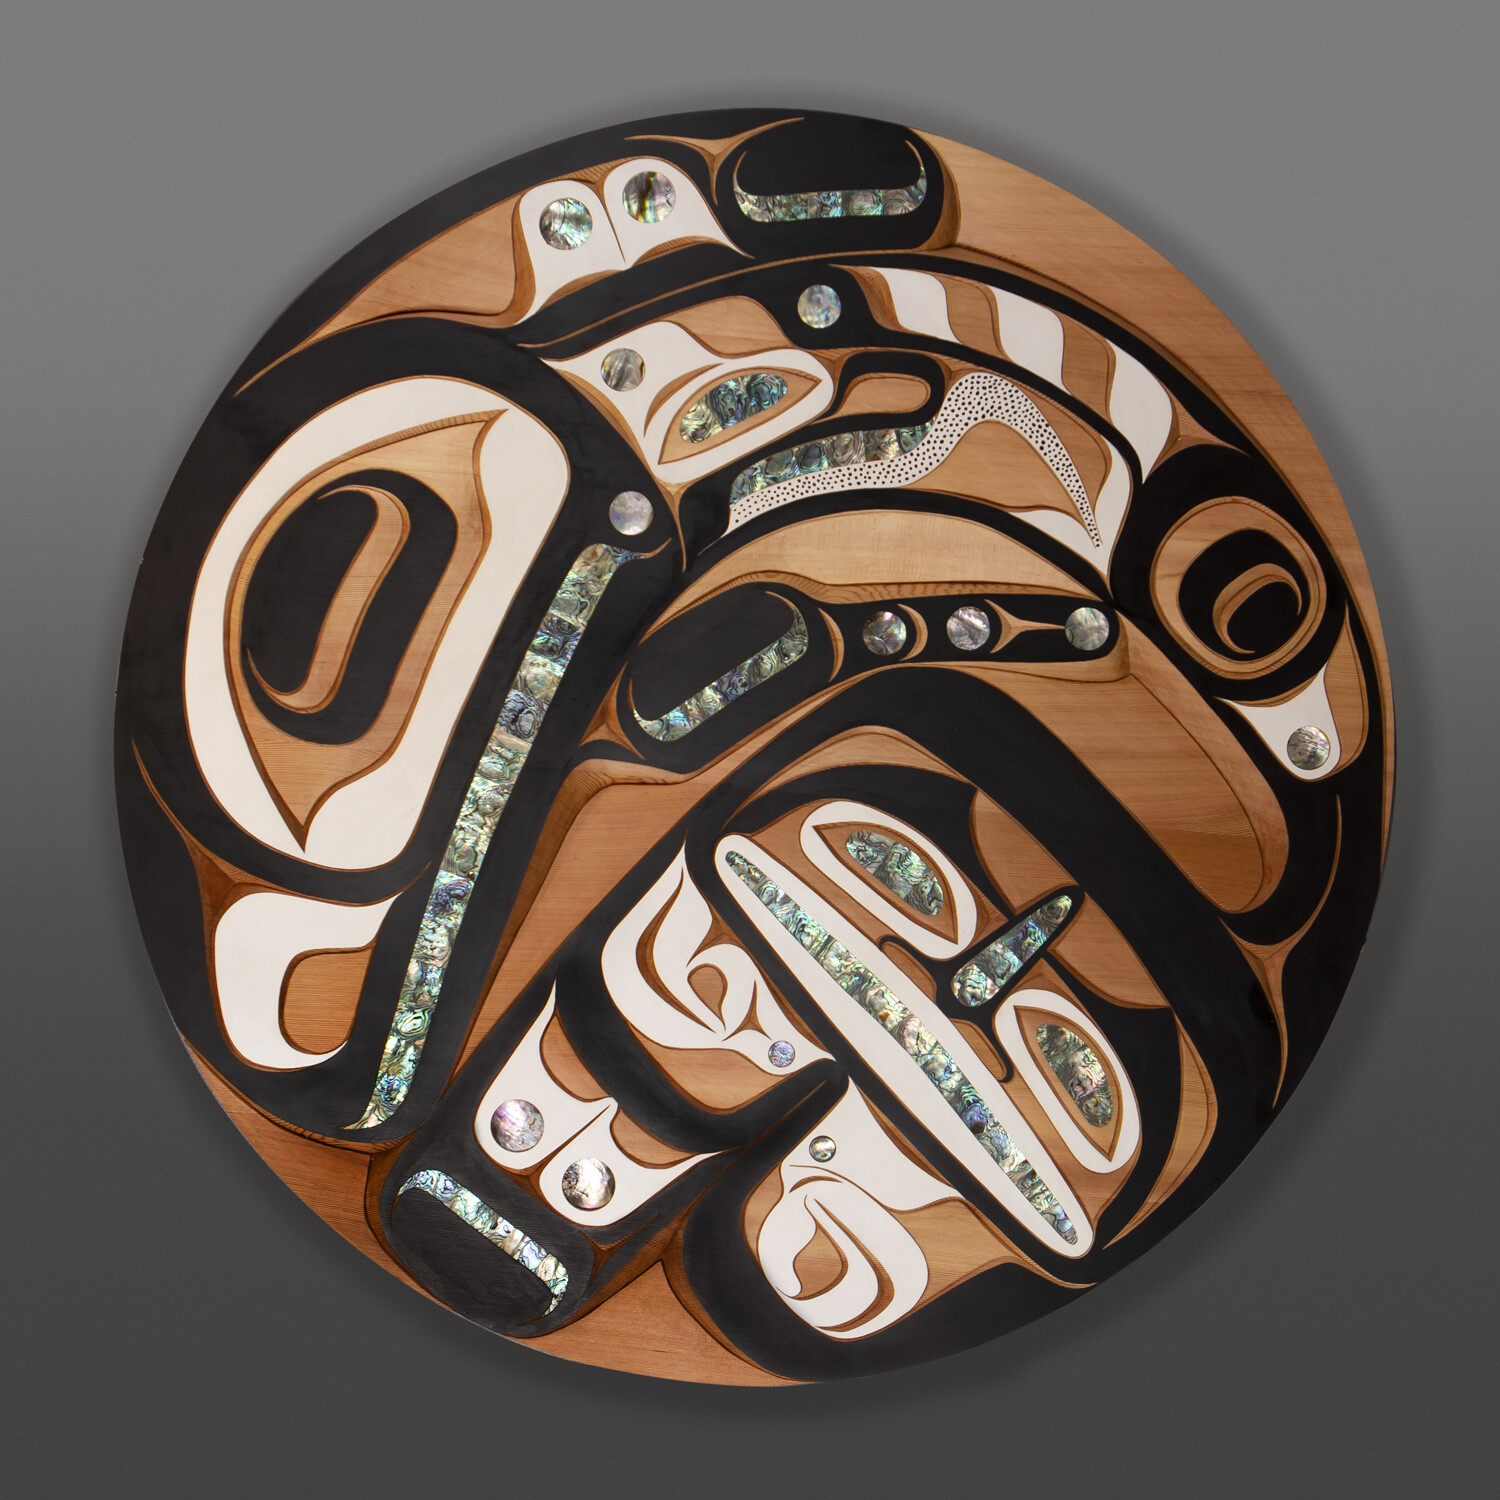 Killerwhale
Moy Sutherland
Nuu-Chah-Nulth
Redvcedar, abalone, paint
36" dia. x 2"
$9800